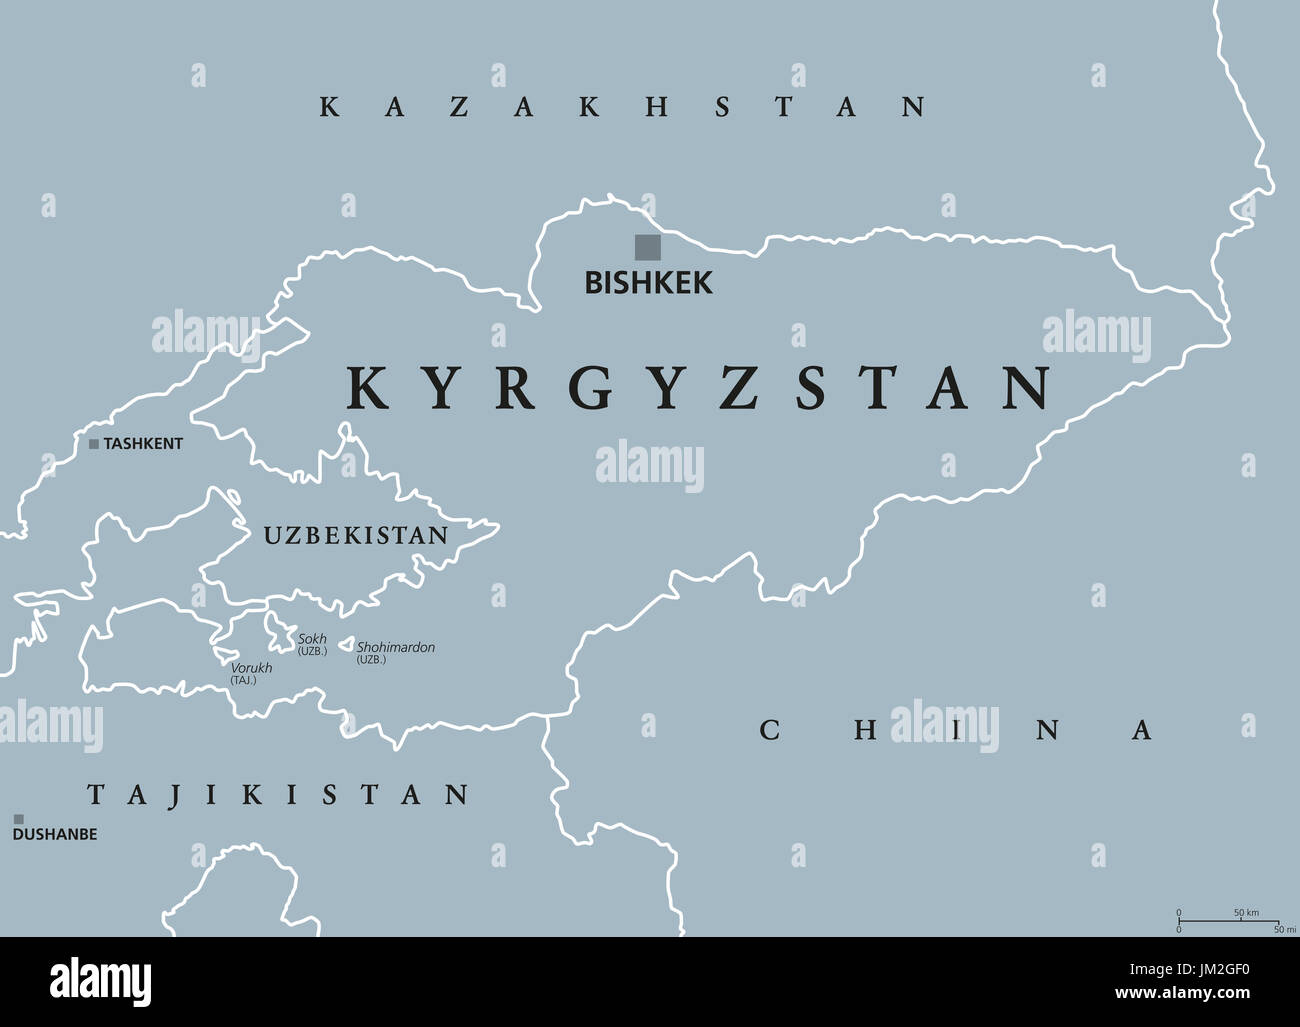 Kyrgyzstan political map with capital Bishkek and borders. Kyrgyz Republic, a landlocked country in Central Asia. Gray illustration. Stock Photo